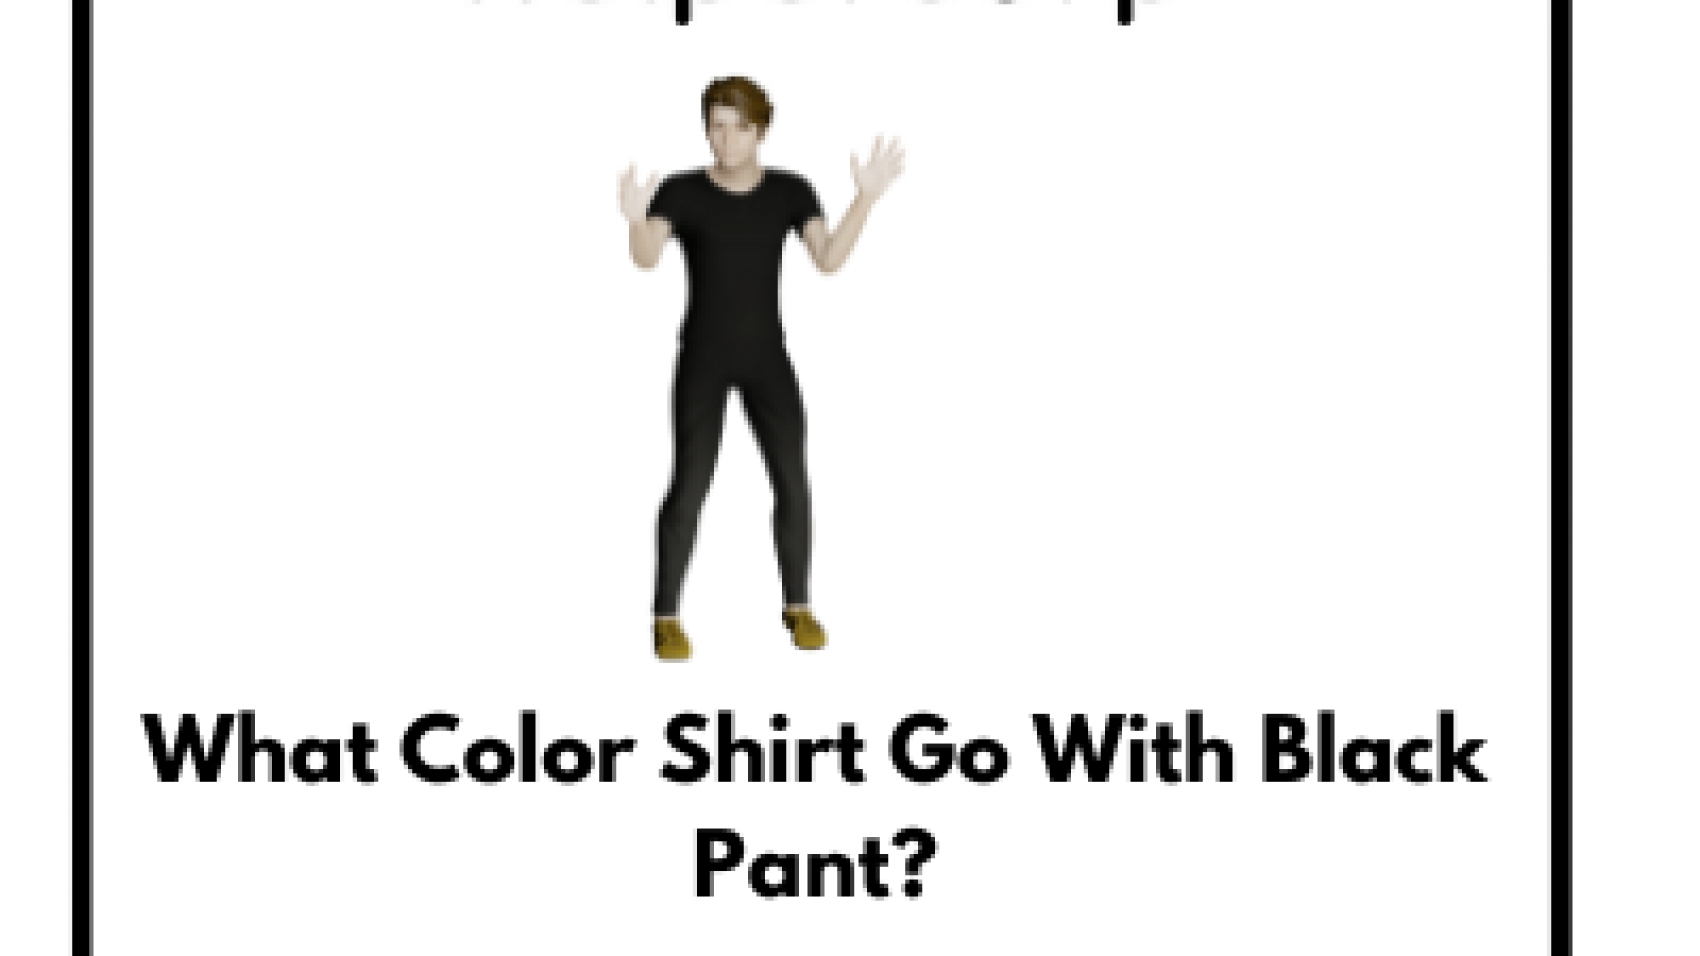 What-Color-Shirt-Go-With-Black-Pant